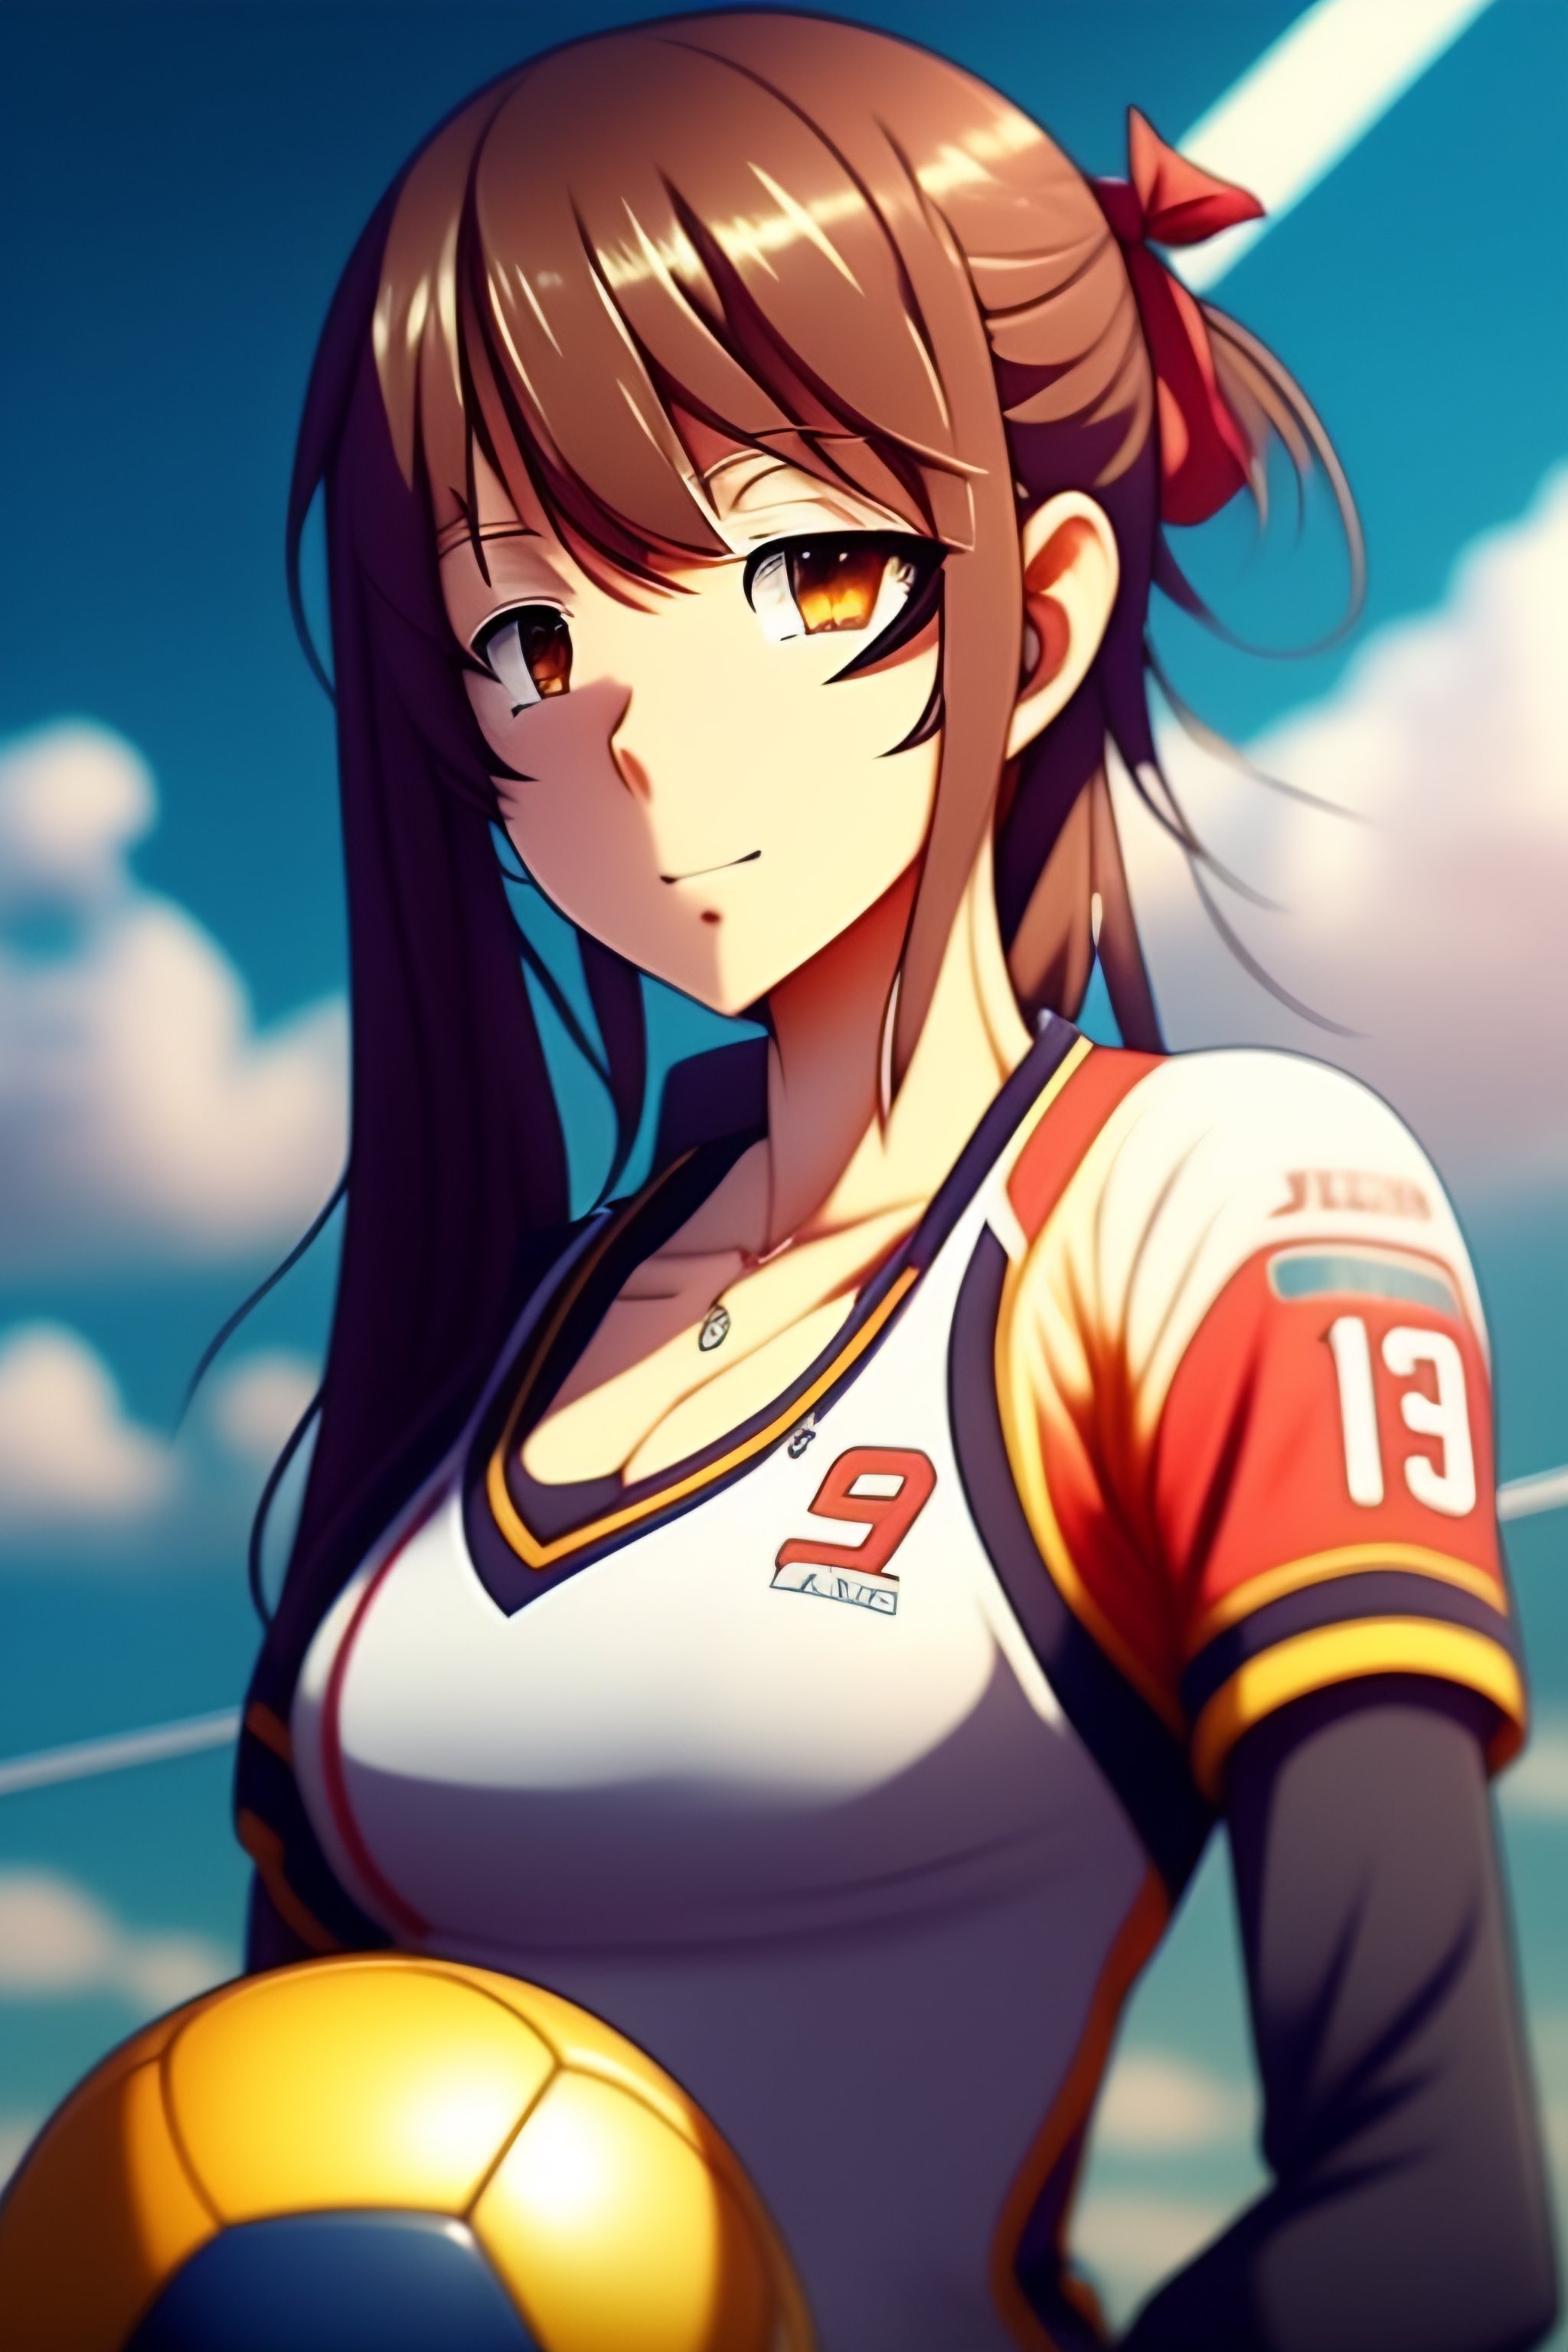 This picture come from internet  Volleyball anime, Volleyball girls,  Kawaii anime girl